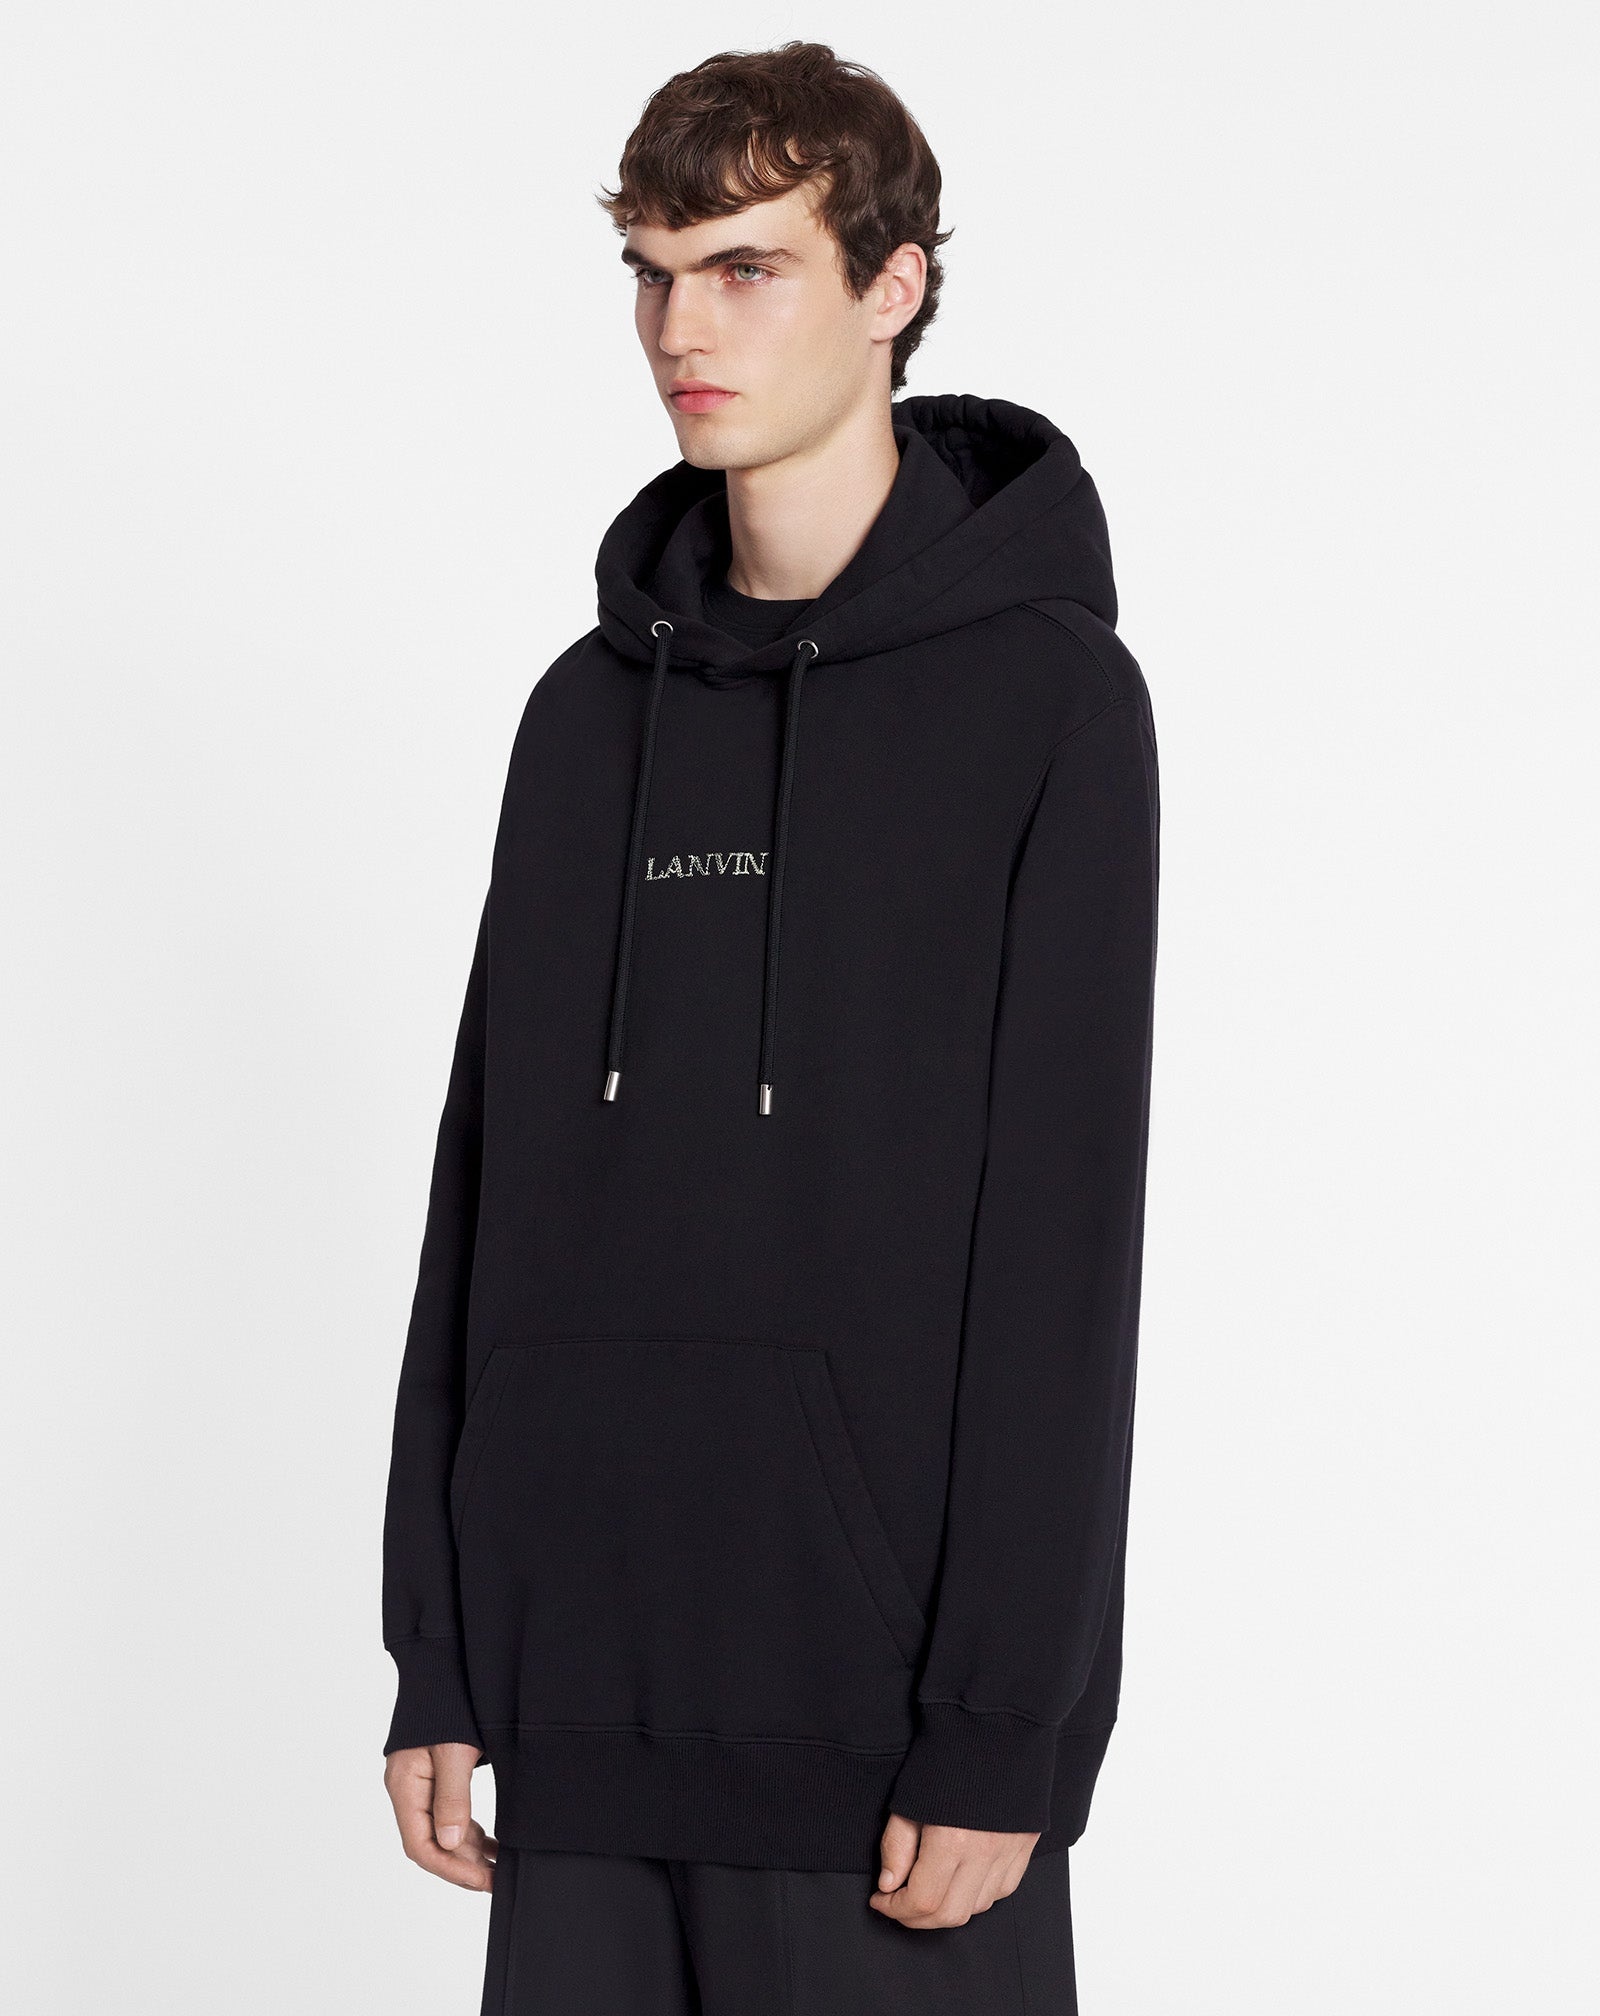 LOOSE-FITTING HOODIE WITH LANVIN LOGO - 5